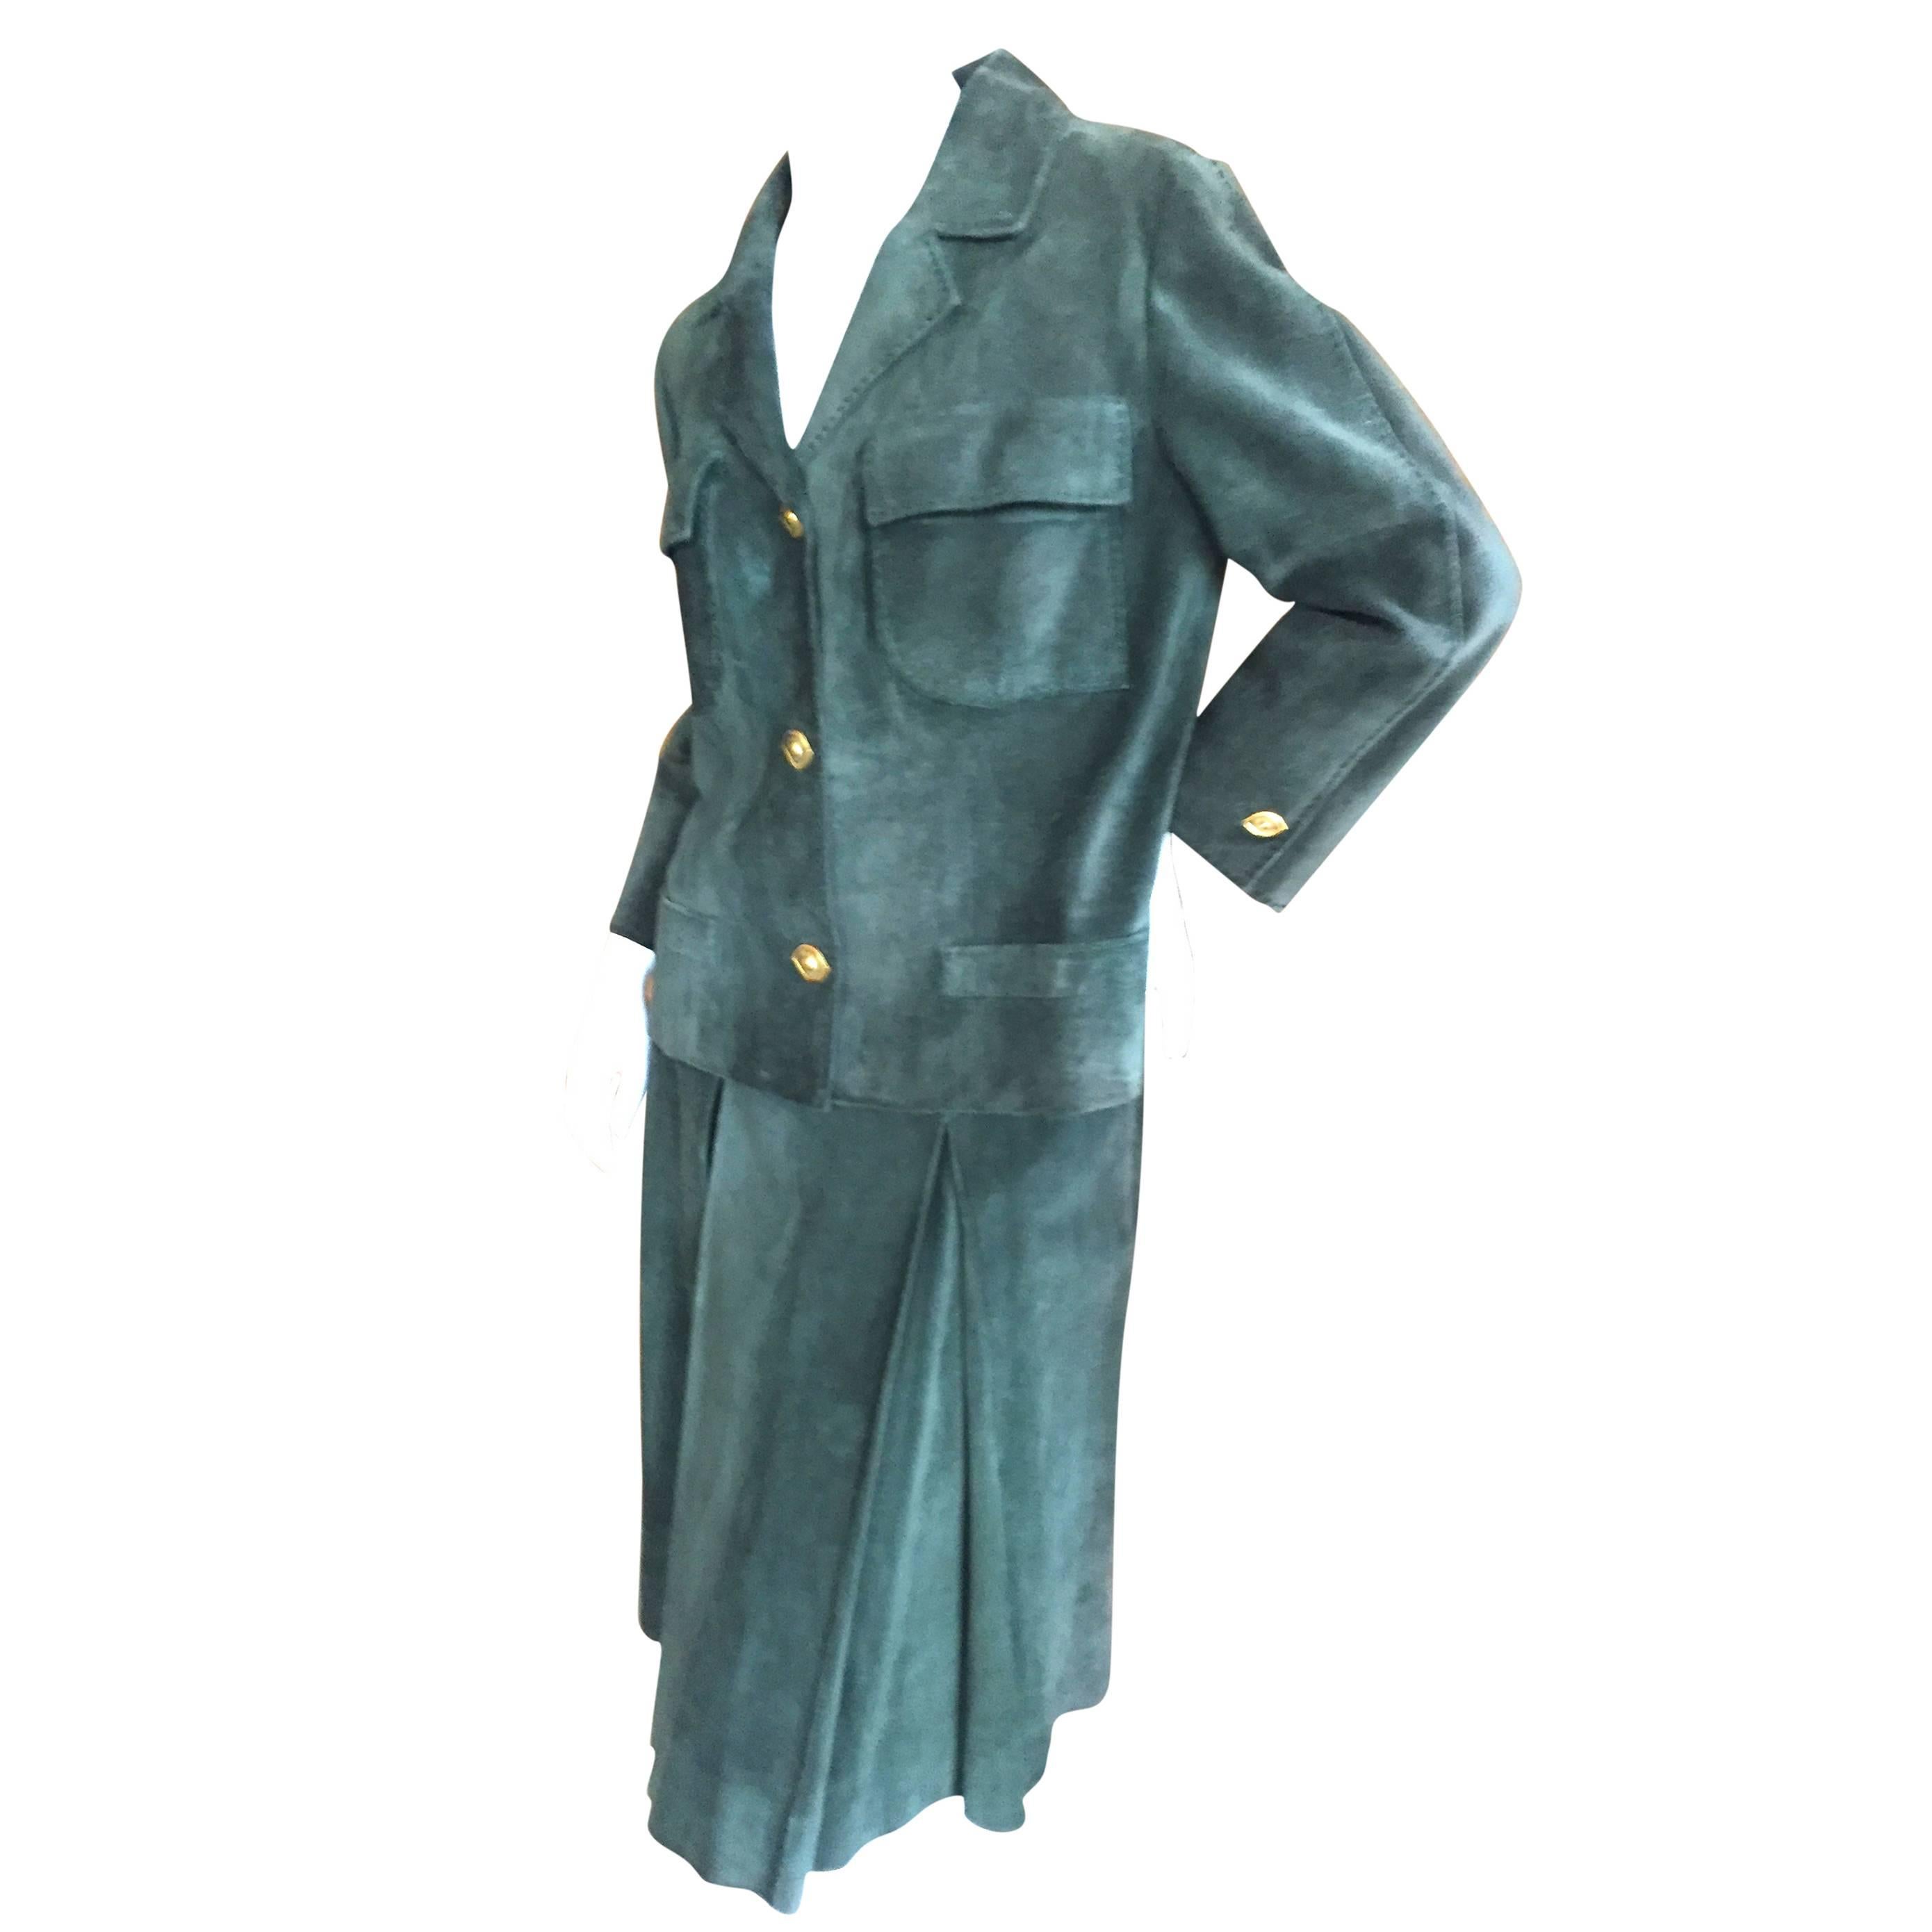 Hermes Scarf Lined Green Suede Skirt Suit with"Cleopatra Eye" Buttons